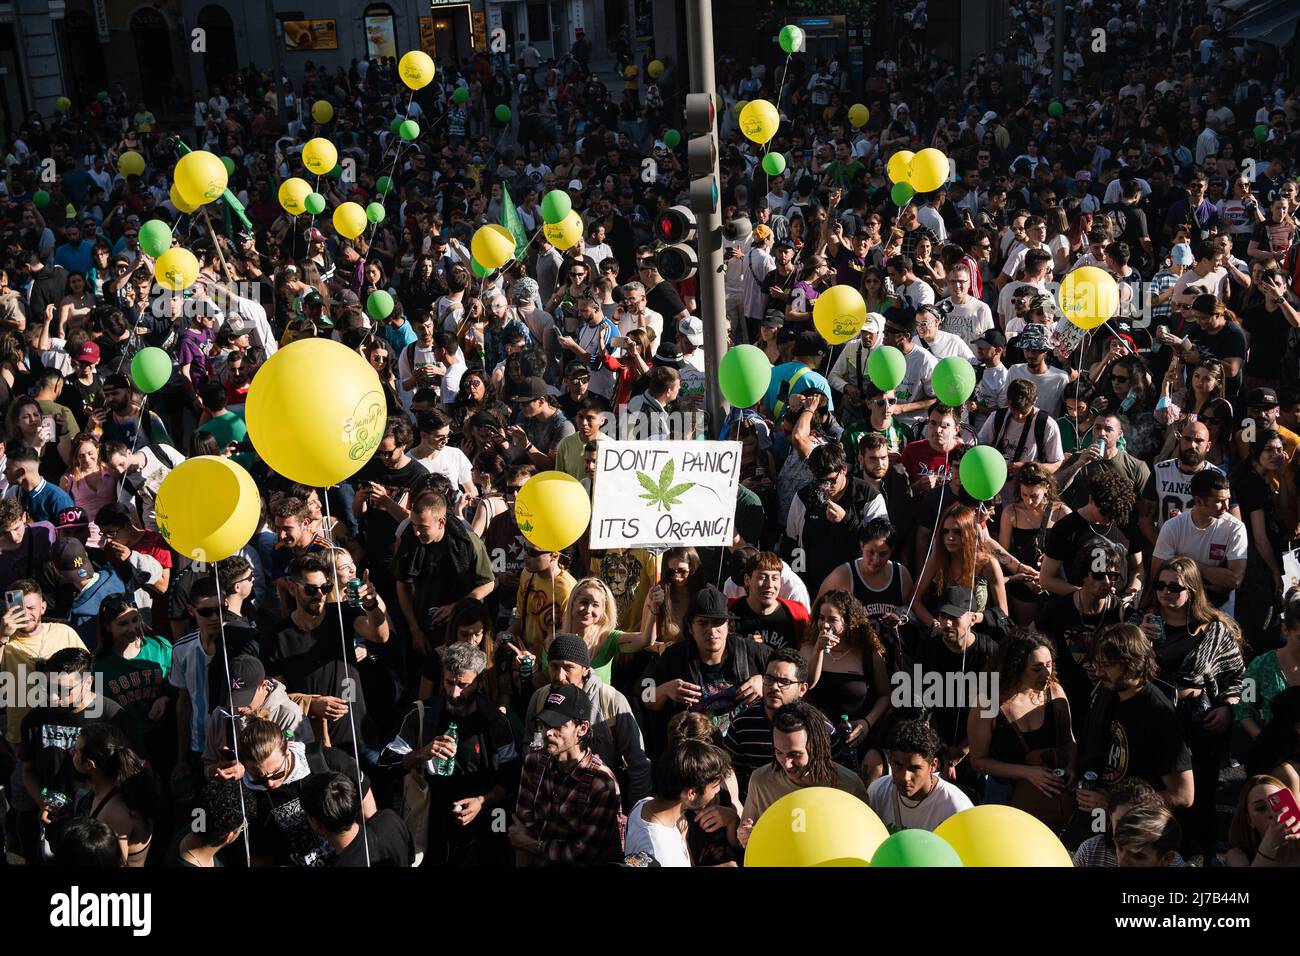 Hundreds of protesters hold balloons during a demonstration in the center of Madrid. Thousands of pro-cannabis activists took part in a demonstration in La Gran Via in Madrid, Spain, in favor of legalizing the medicinal and recreational use of marijuana. (Photo by Diego Radames / SOPA Images/Sipa USA) Stock Photo